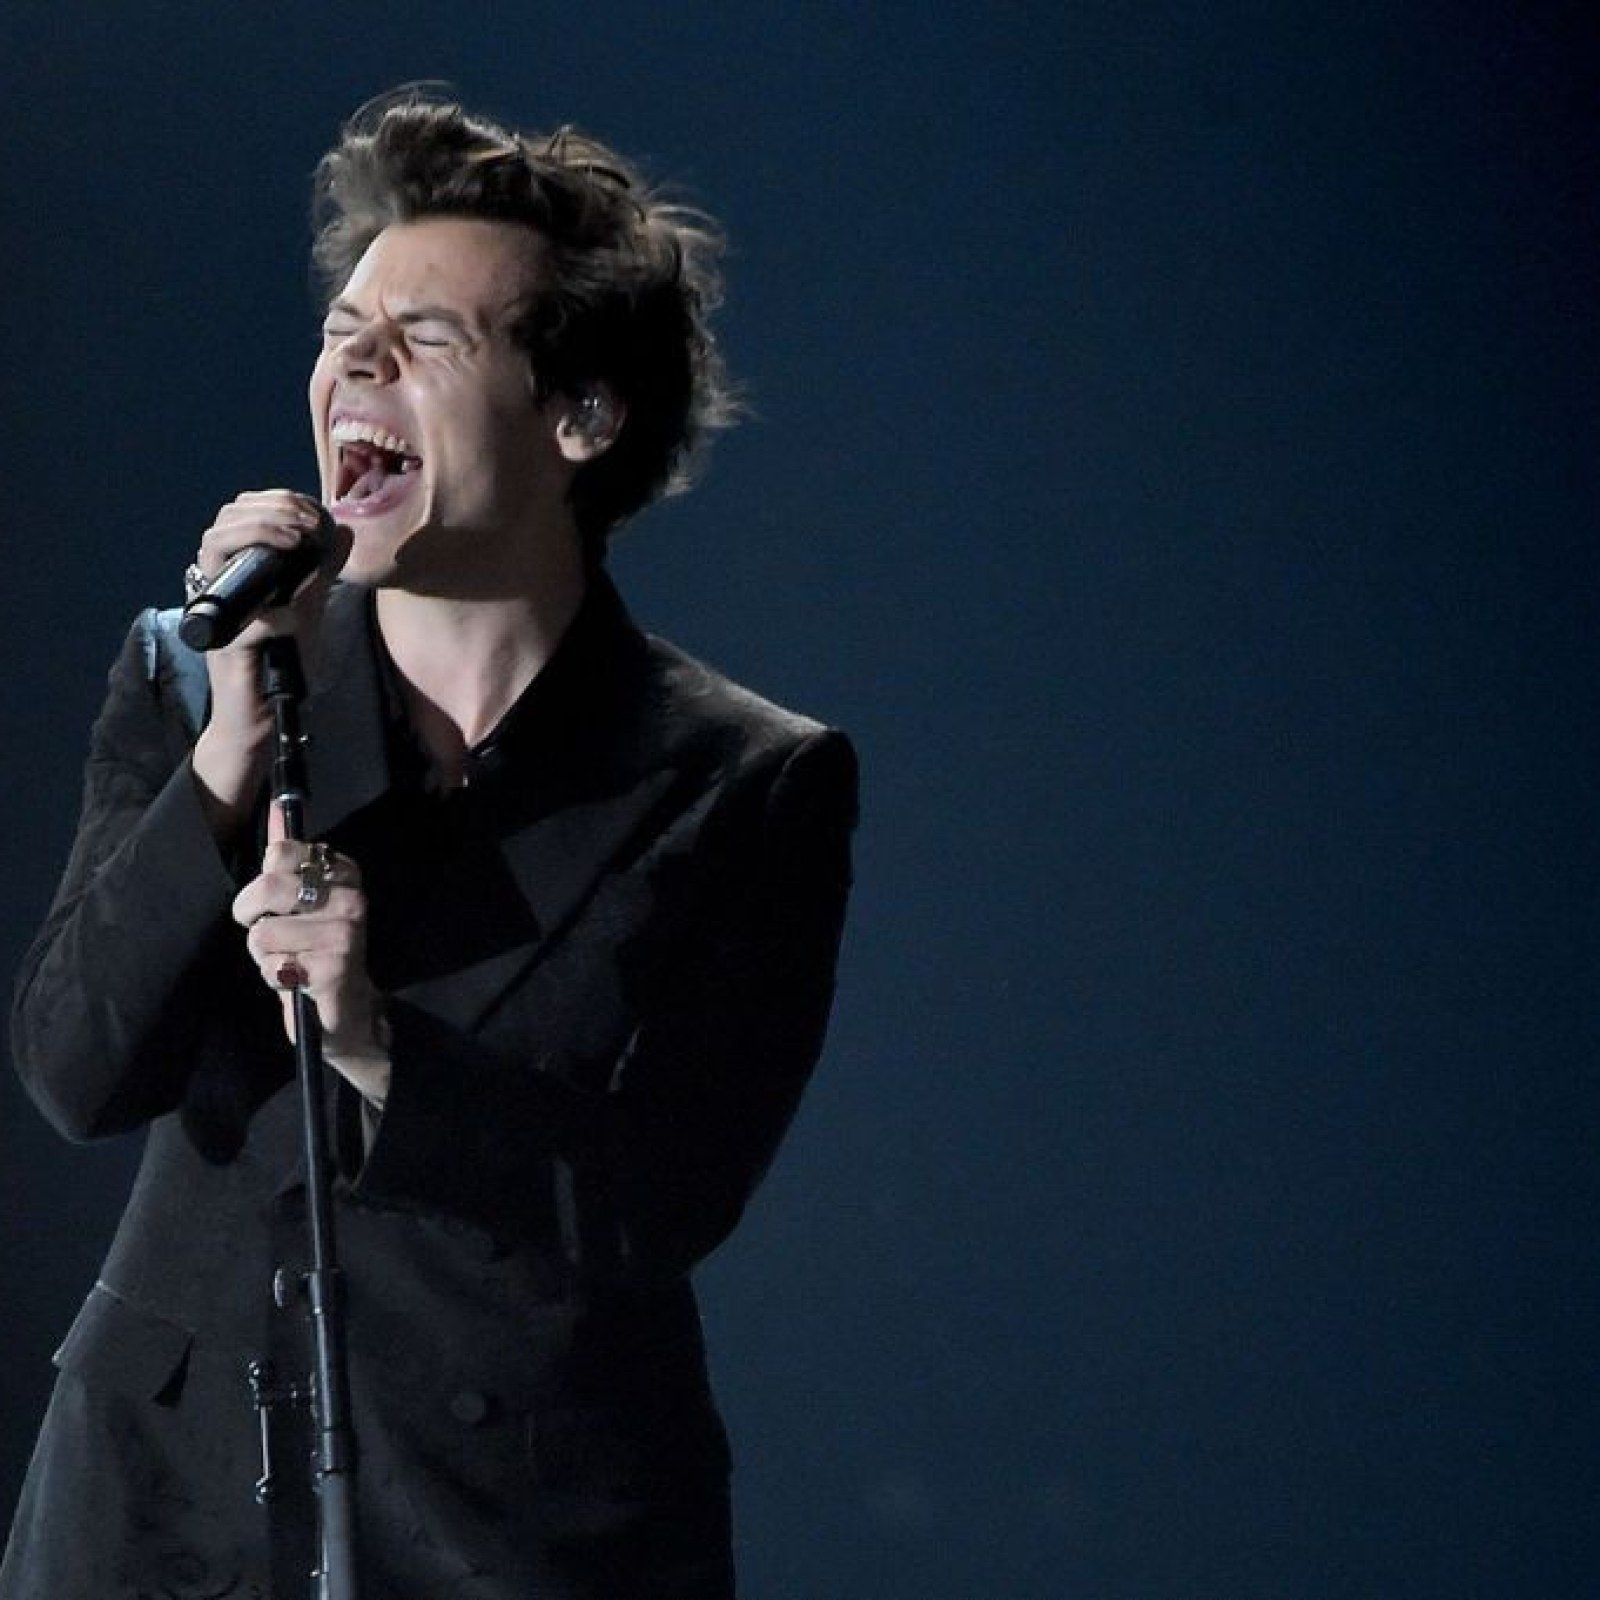 Harry Styles' Song 'Medicine' Hints at Bisexuality, Some Fans Claim